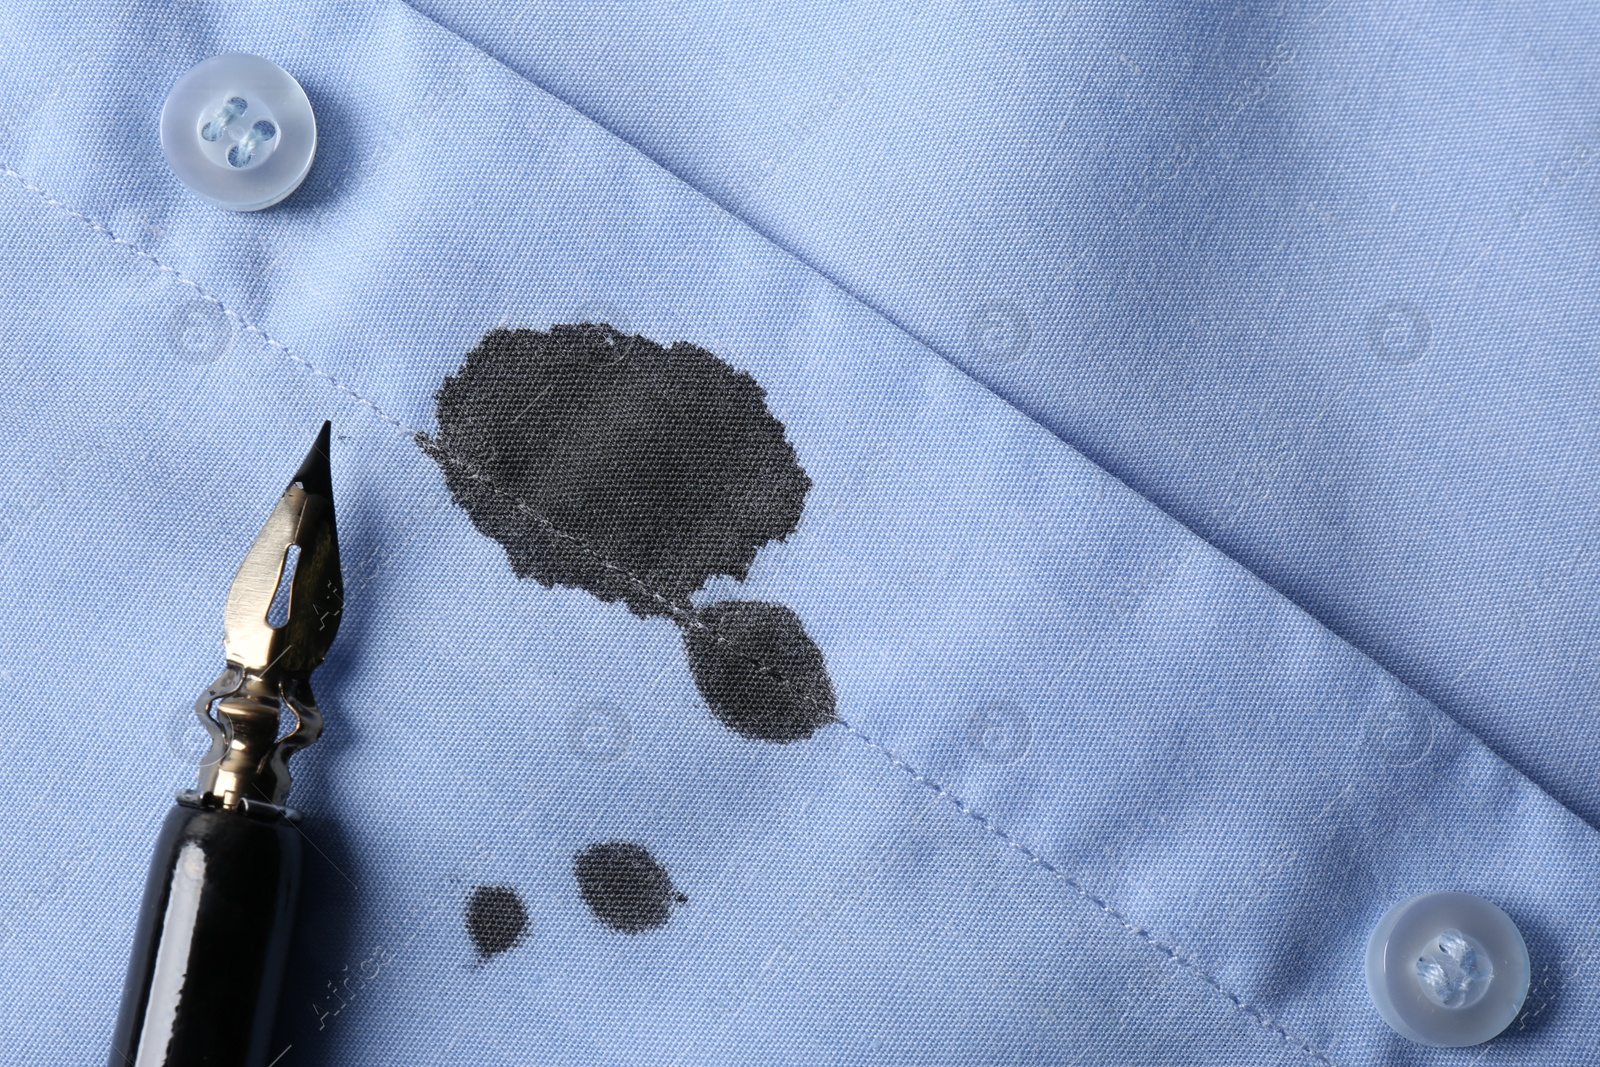 Photo of Black ink stain on light blue shirt and pen, top view. Space for text